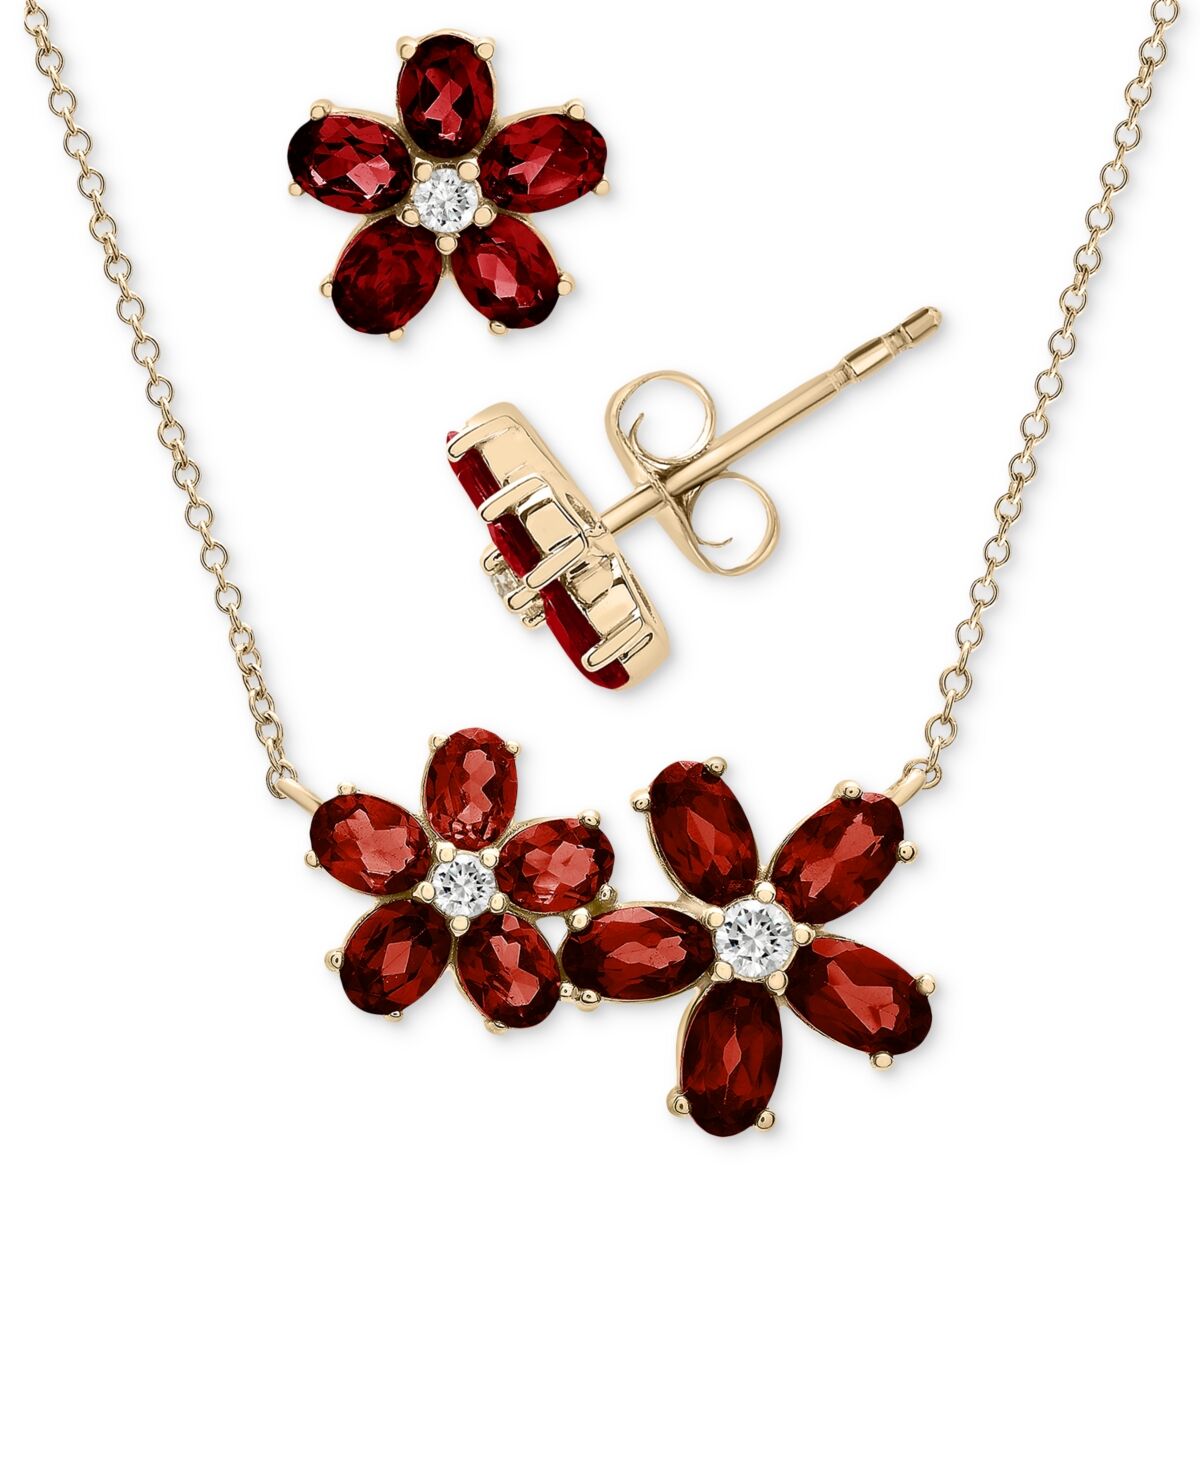 Macy's 2-Pc. Set Garnet (4-3/4 ct. t.w.) & White Topaz (1/4 ct. t.w.) Flower Pendant Necklace & Matching Stud Earrings in 14k Gold-Plated Sterling Silver - G